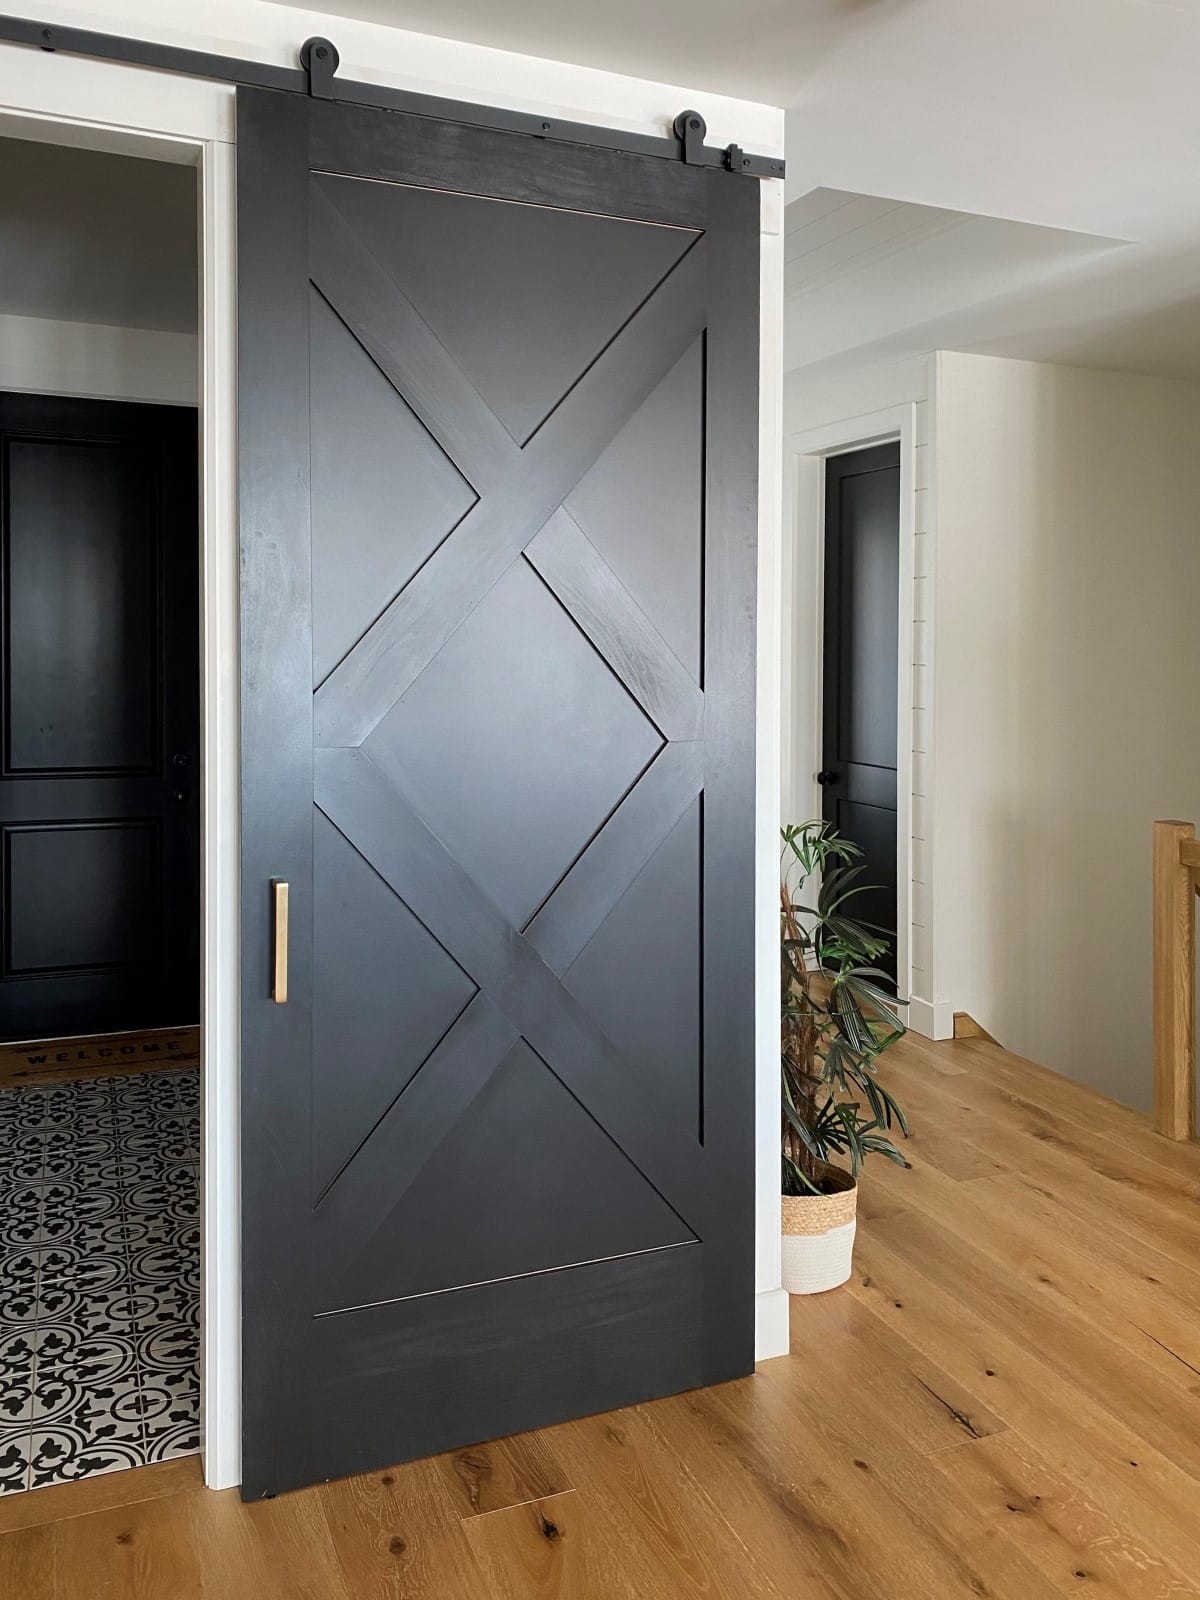 5 Guidelines on How to Use Black Painted Trim